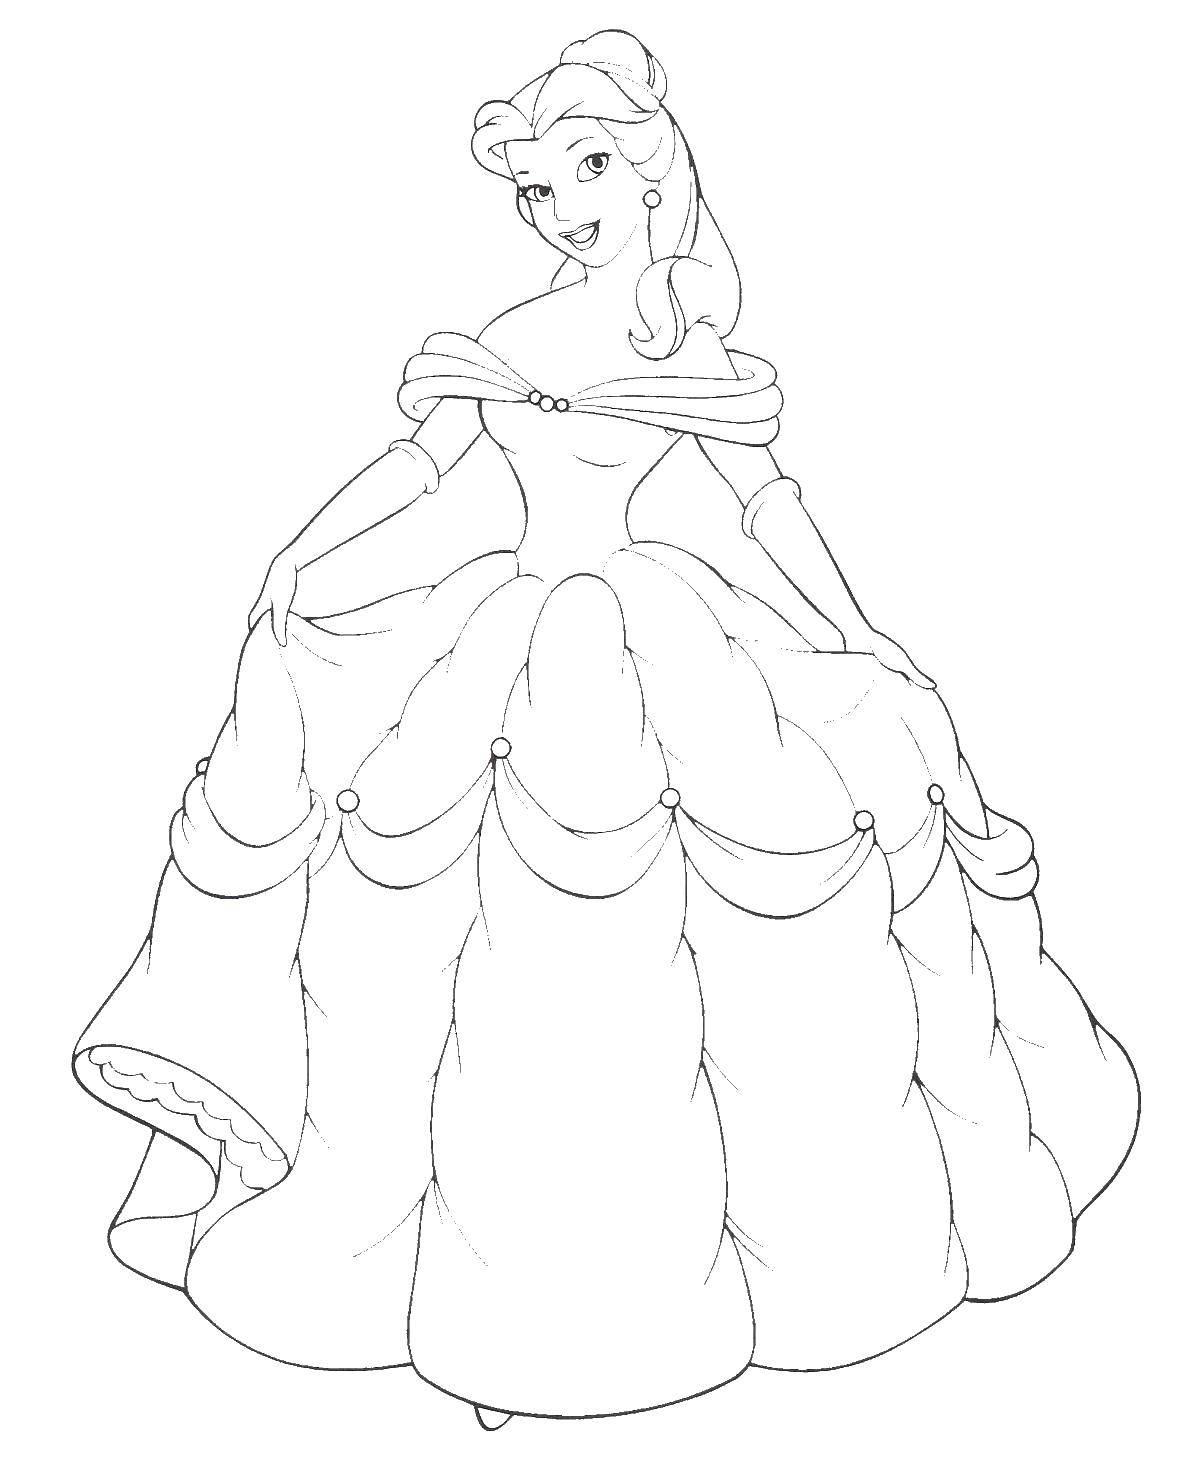 Coloring Belle. Category Disney coloring pages. Tags:  Belle, beauty and the beast, Disney cartoons.